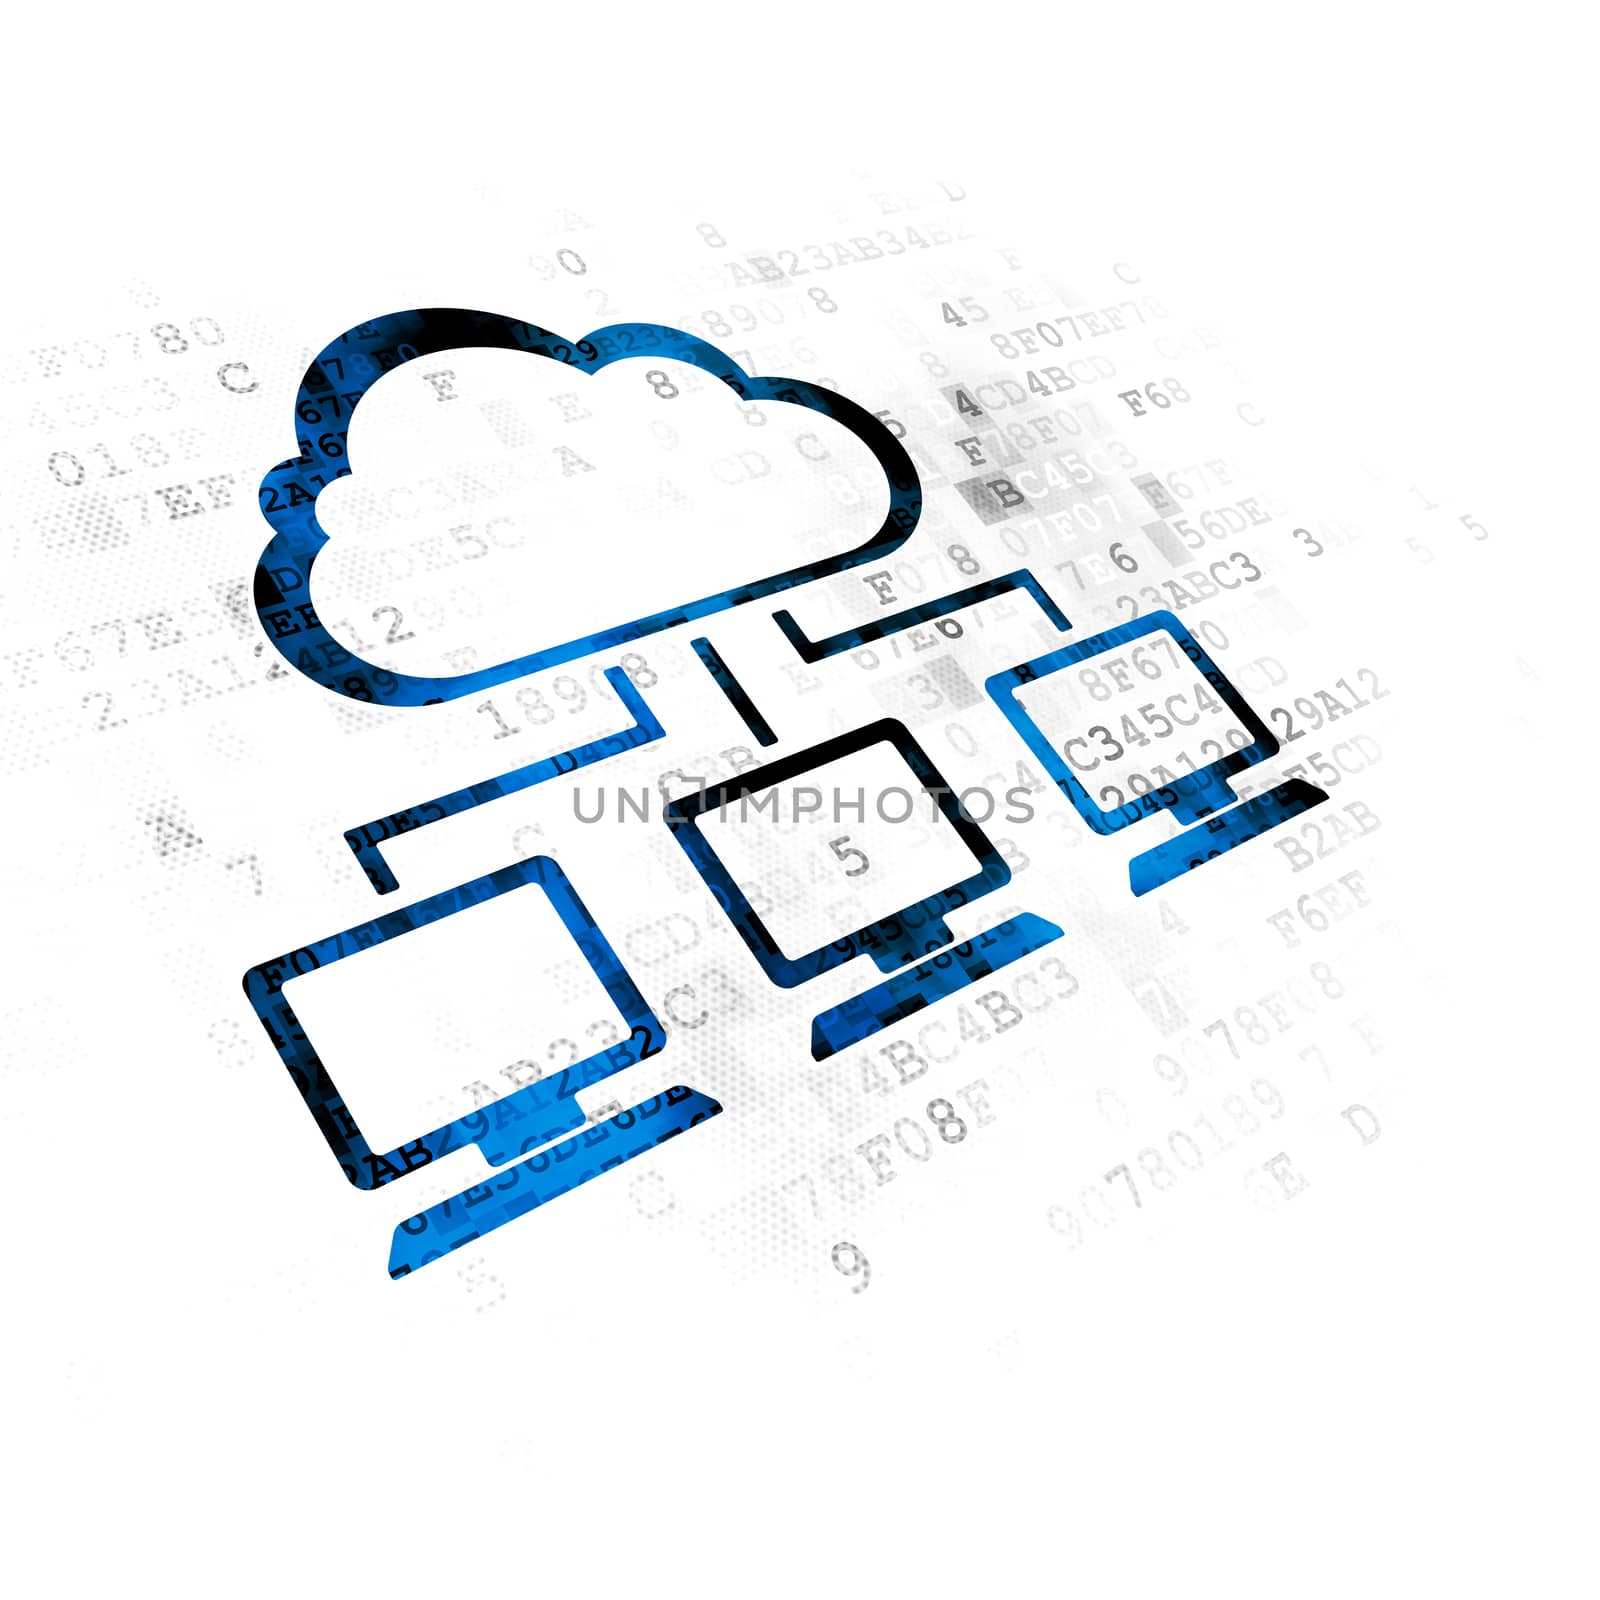 Cloud networking concept: Pixelated blue Cloud Network icon on Digital background